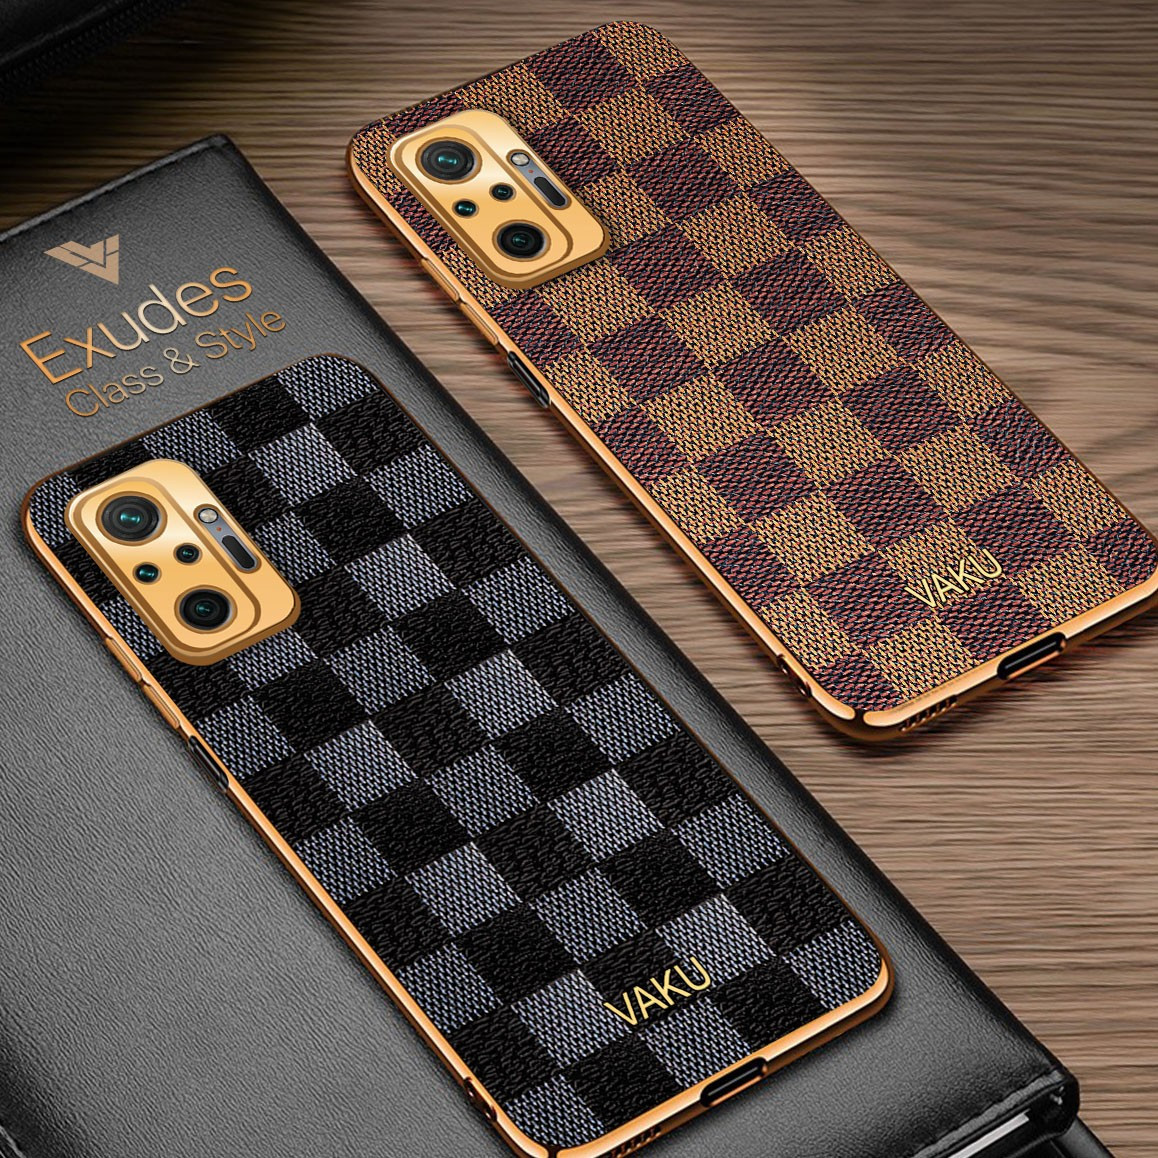 LOUIS VUITTON LIMITED EDITION Samsung Galaxy Note 20 Ultra Case Cover